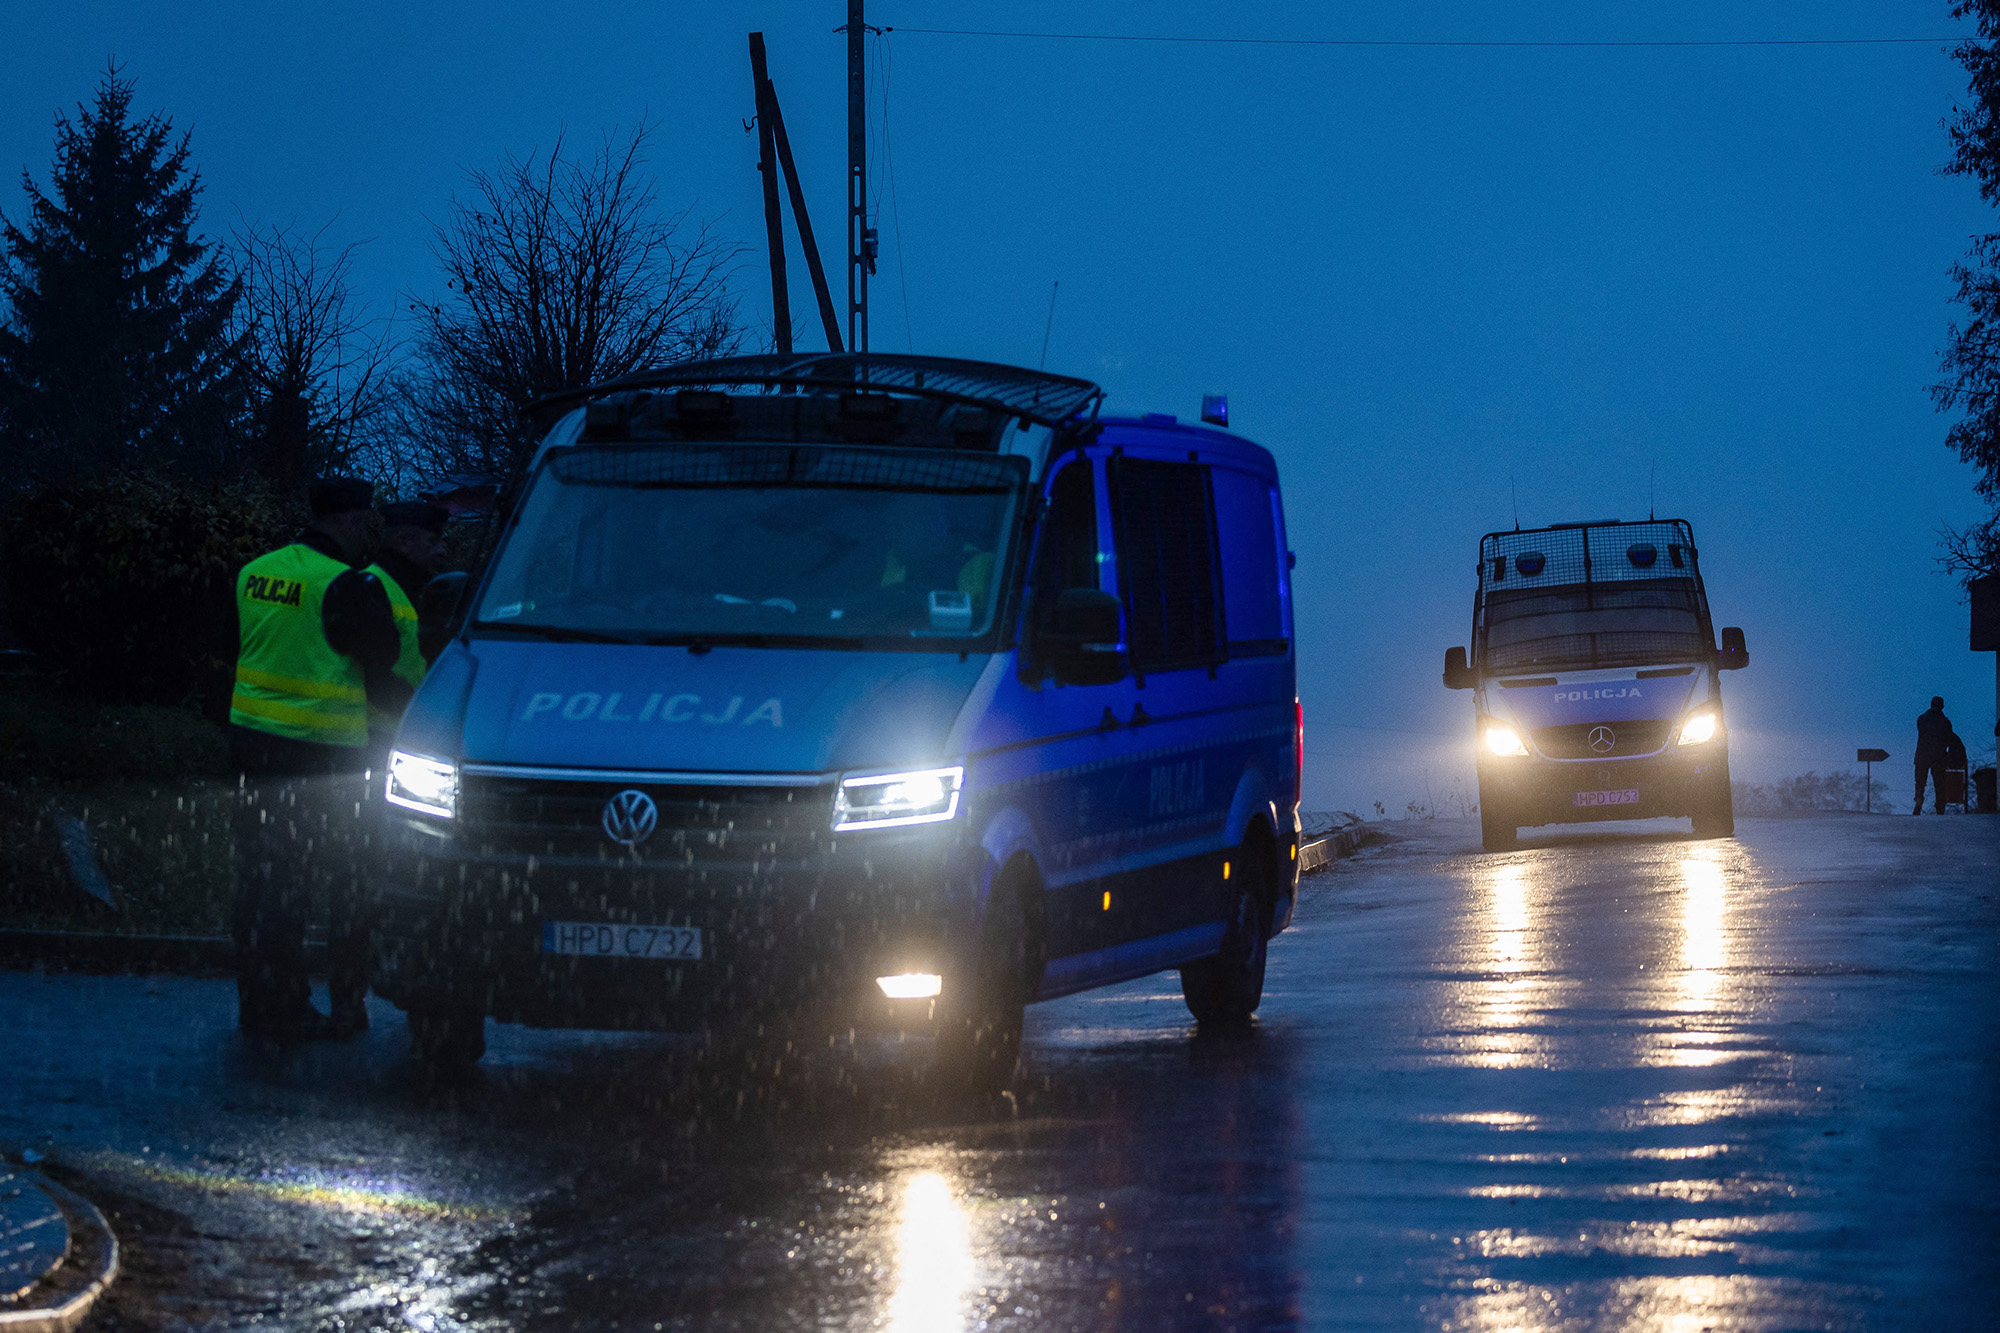 Police block a road near the site where a missile strike killed two people on November 17, in the eastern Poland village of Przewodow, near the border with Ukraine.